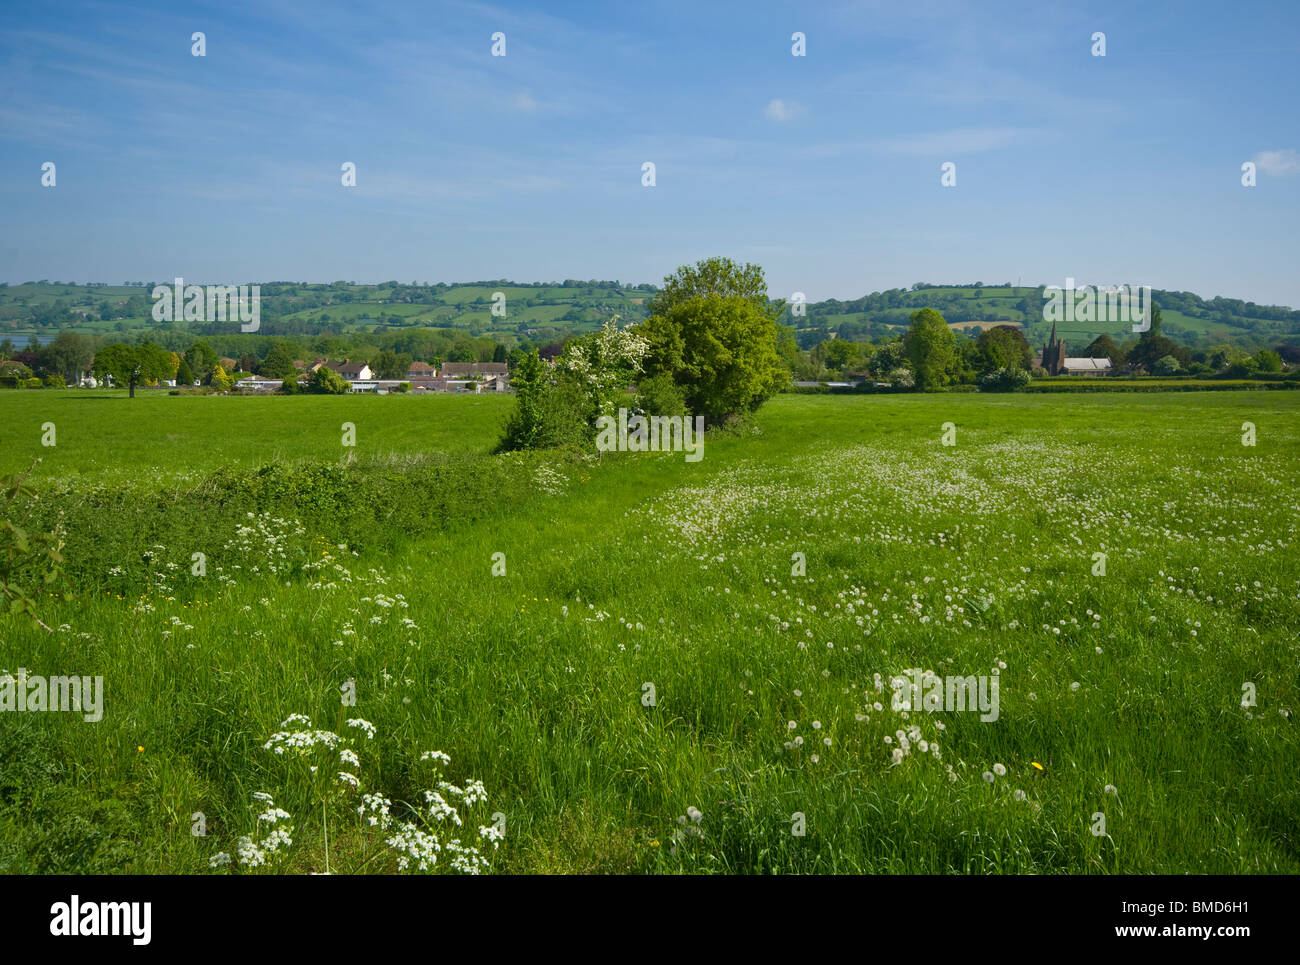 The Somerset Countryside As Seen From The A368 Towards The Village Of Ubley Somerset England Stock Photo